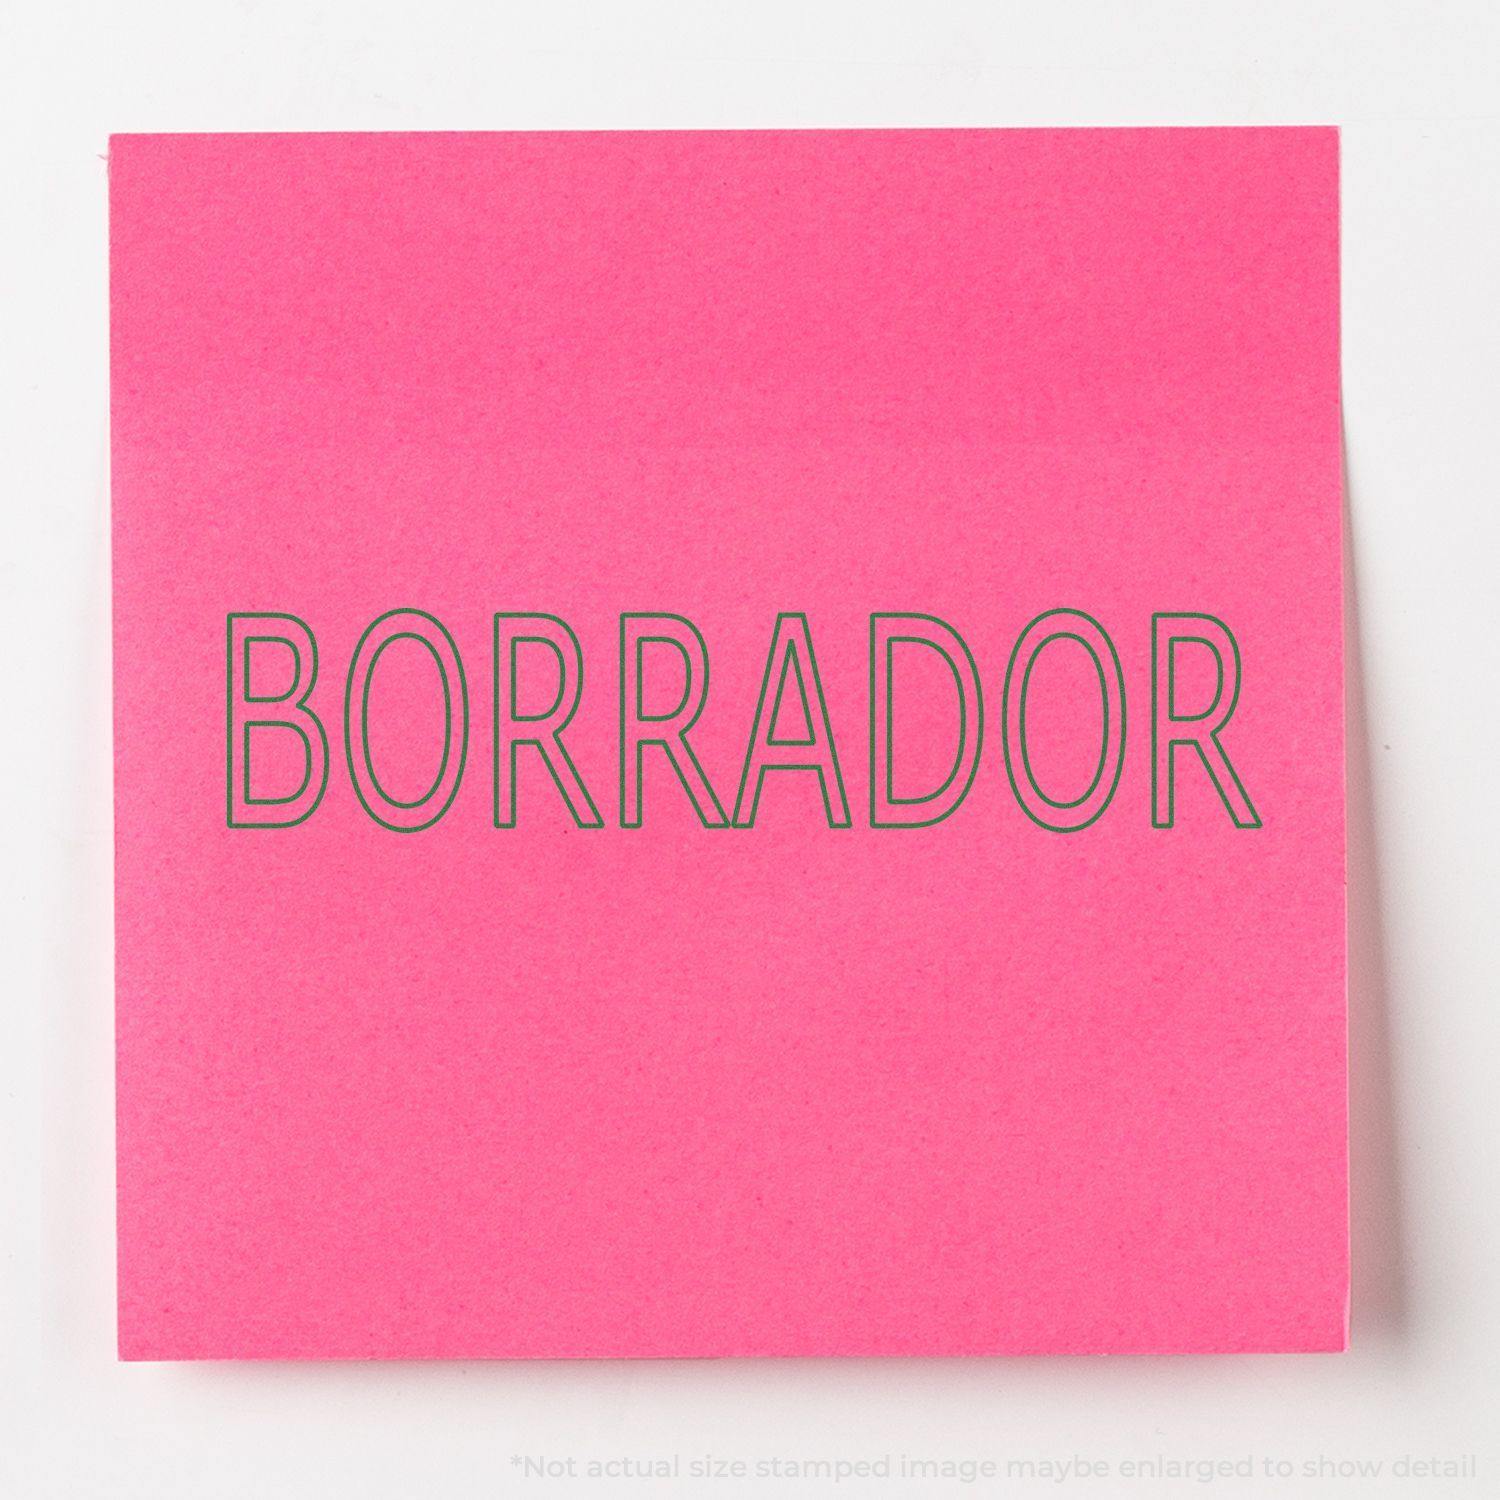 A self-inking stamp with a stamped image showing how the text "BORRADOR" in a large outline style is displayed by it after stamping.